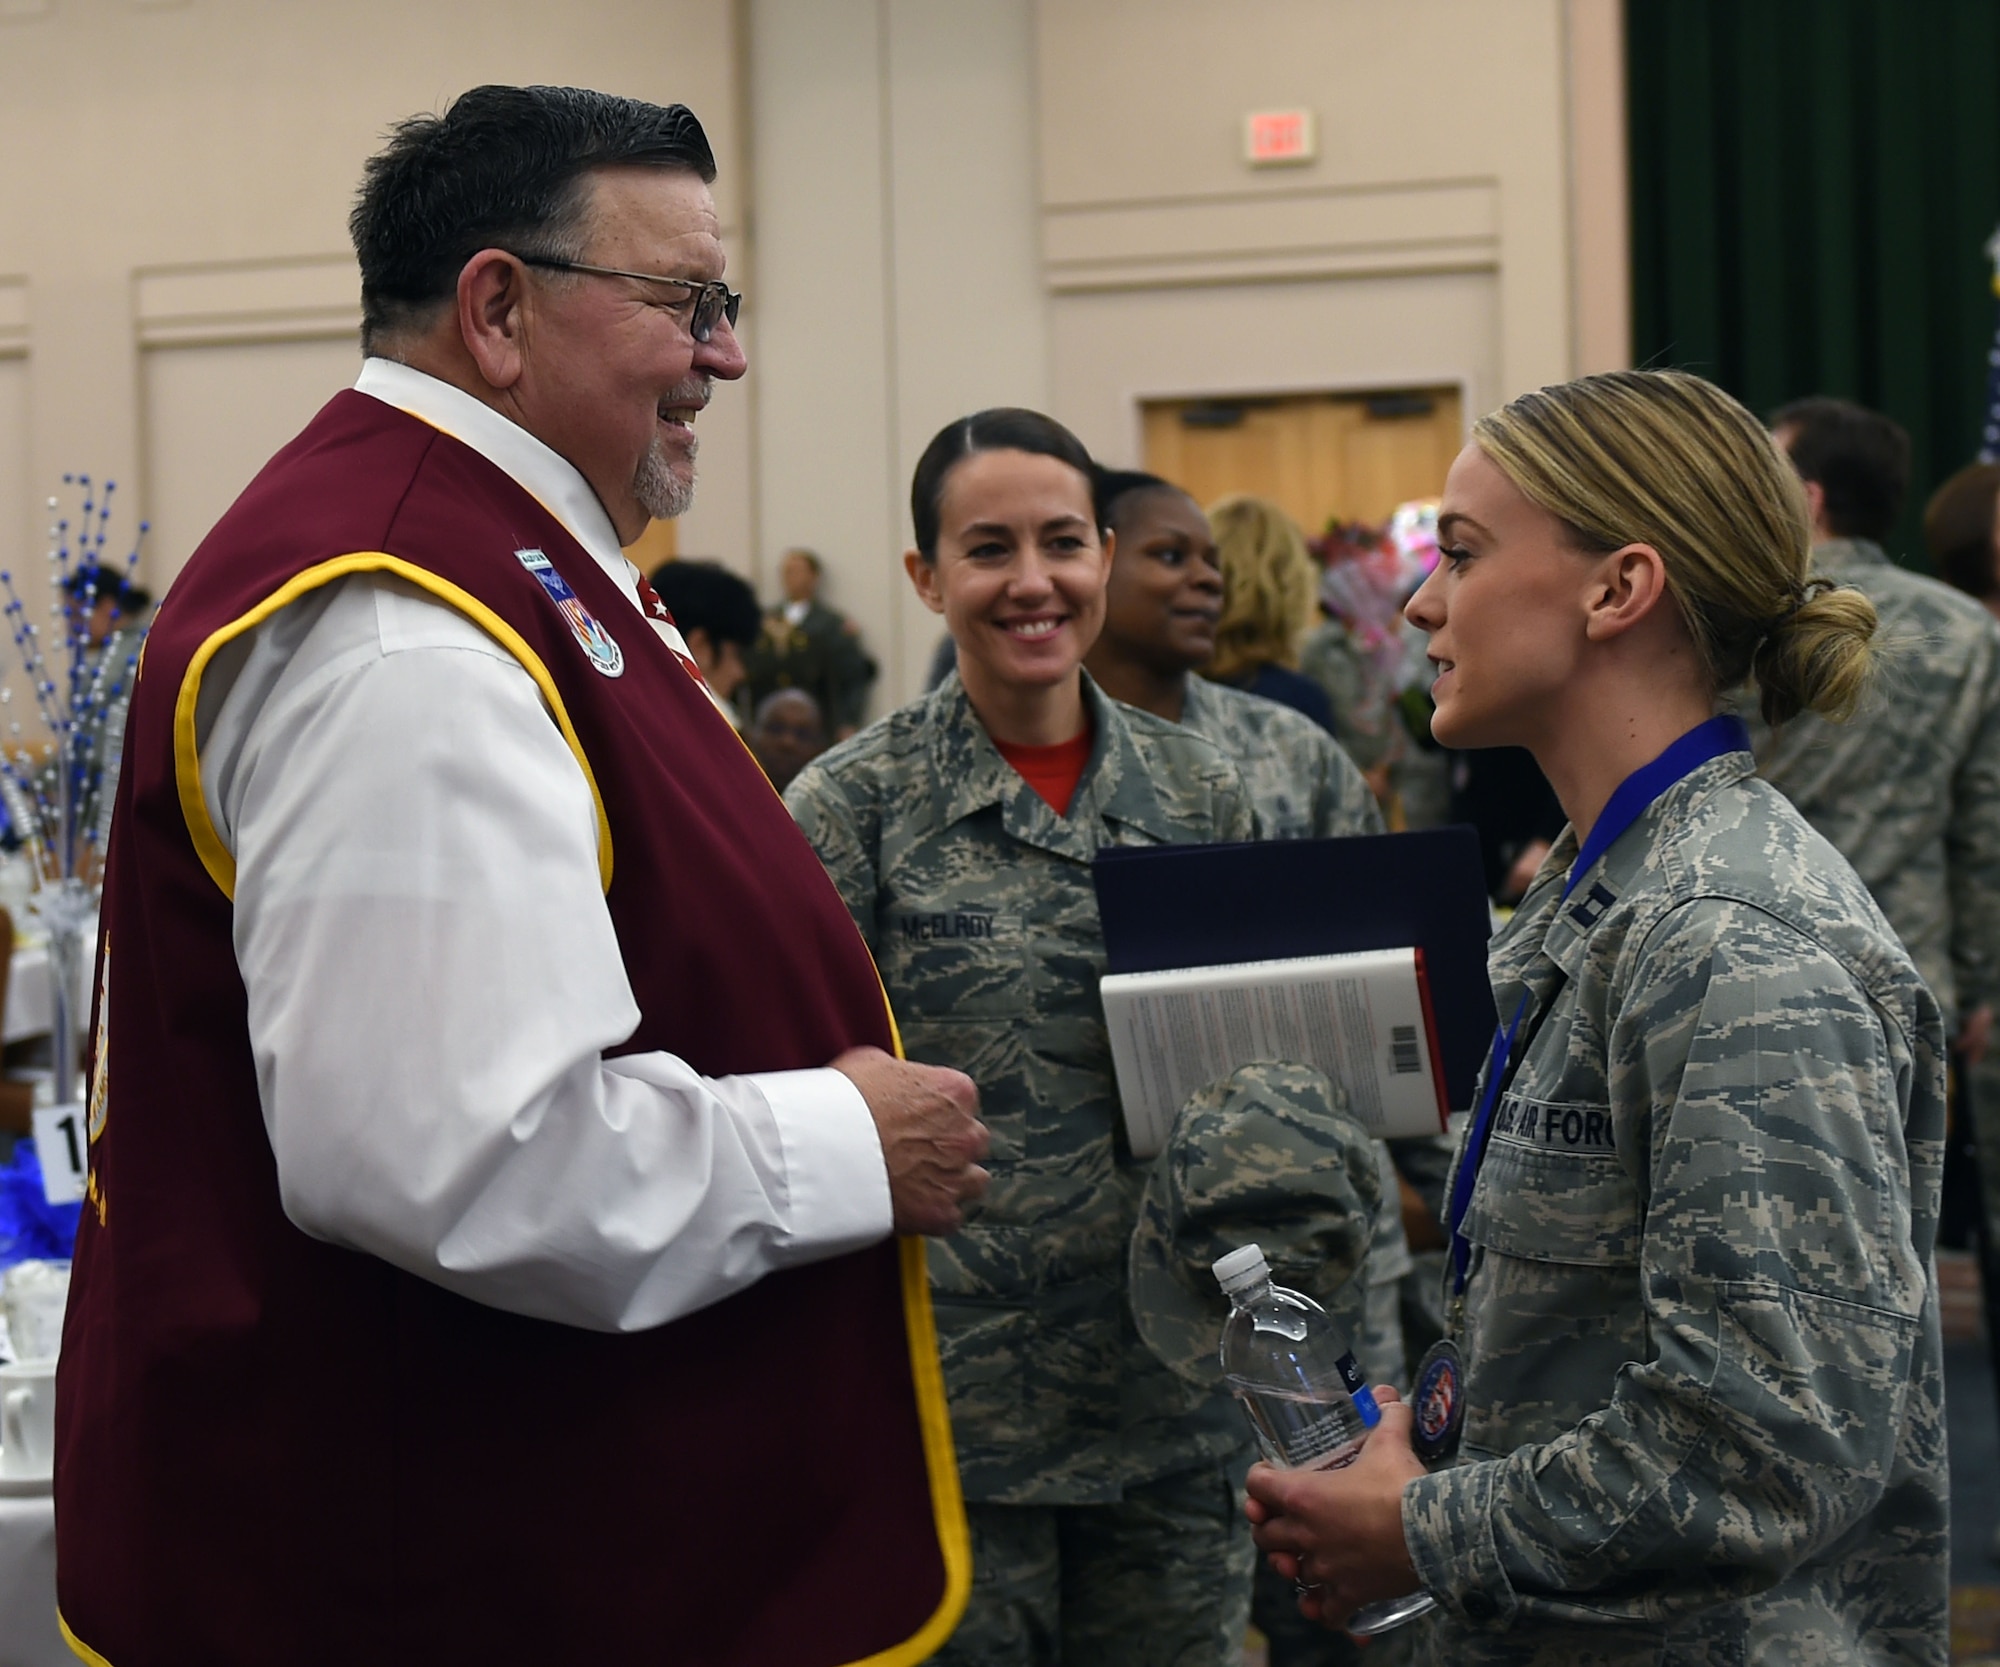 Retired Capt. William A. Robinson, former prisoner of war, speaks with Capt. Jennifer Aspinwall, 59th Medical Operations Group occupational therapy element leader, during the 59th Medical Wing annual awards luncheon. Aspinwall was selected the wing’s company grade officer of the year. As an airman first class, Robinson spent seven and a half years as a prisoner of war in North Vietnam before his release in 1973. (U.S. Air Force photo/Staff Sgt. Jason Huddleston)